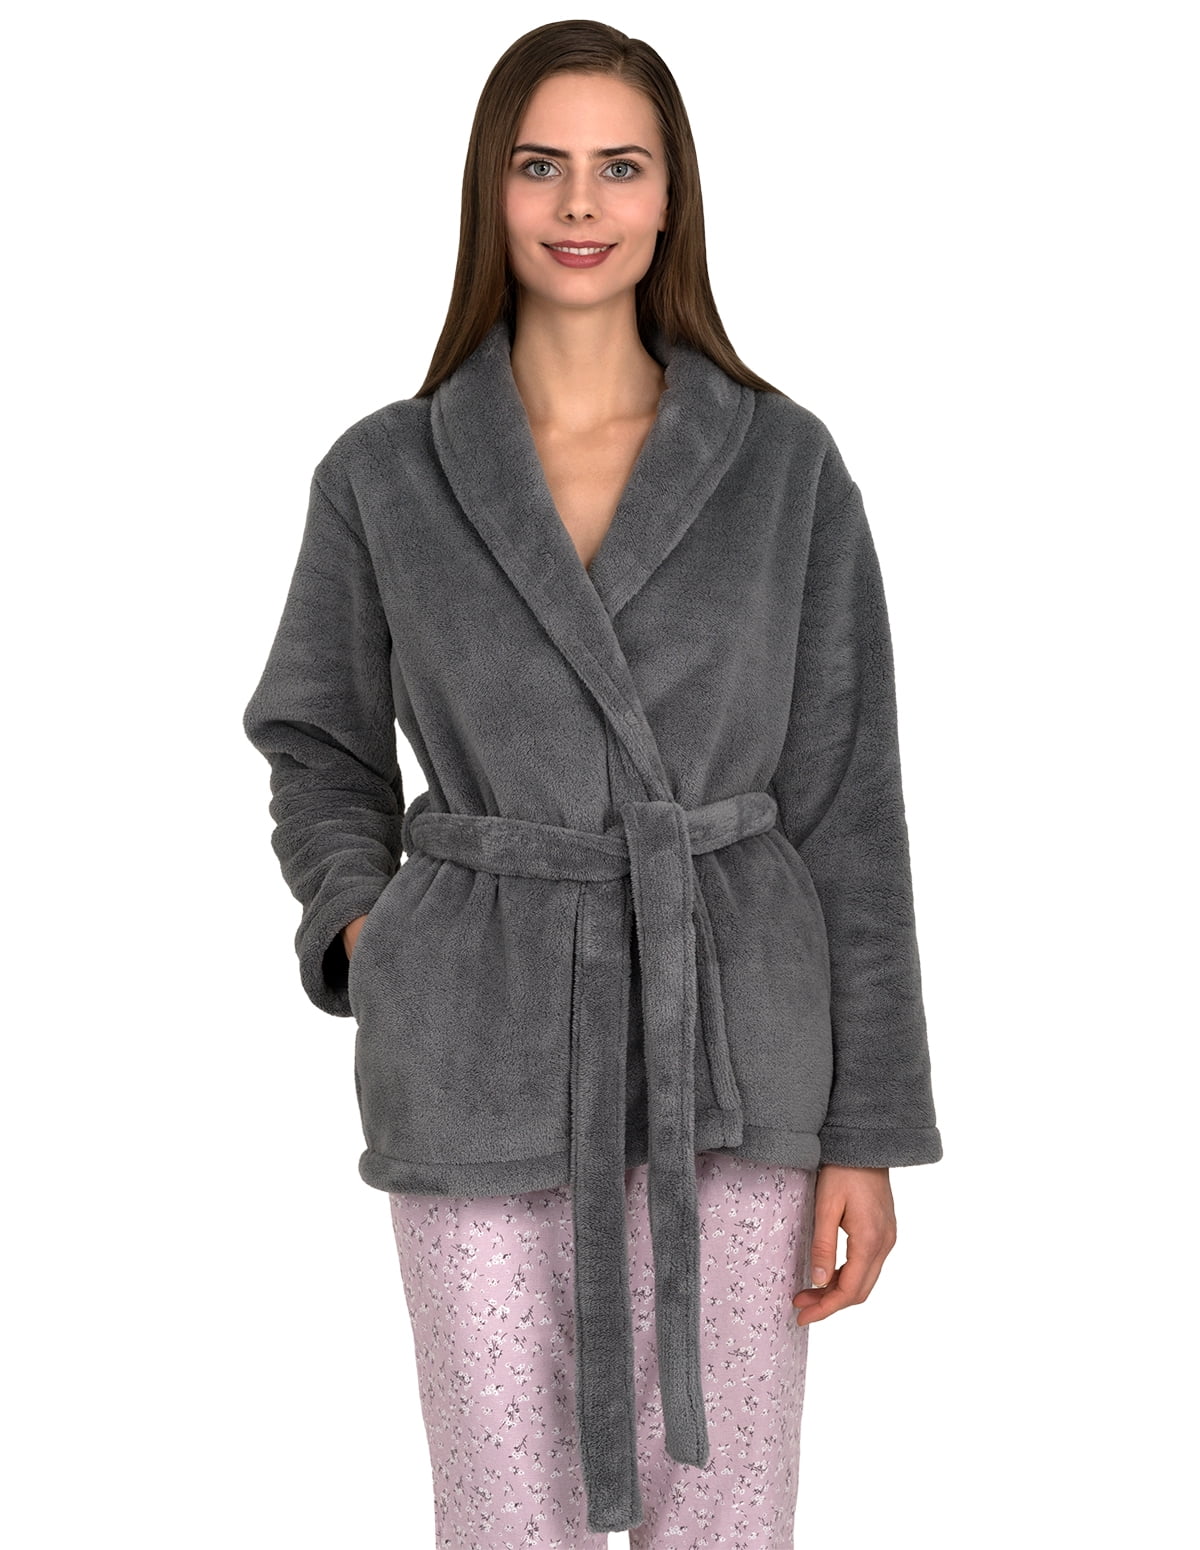 TowelSelections Women's Bed Jacket Fleece Cardigan Cuddly Robe Large/X ...